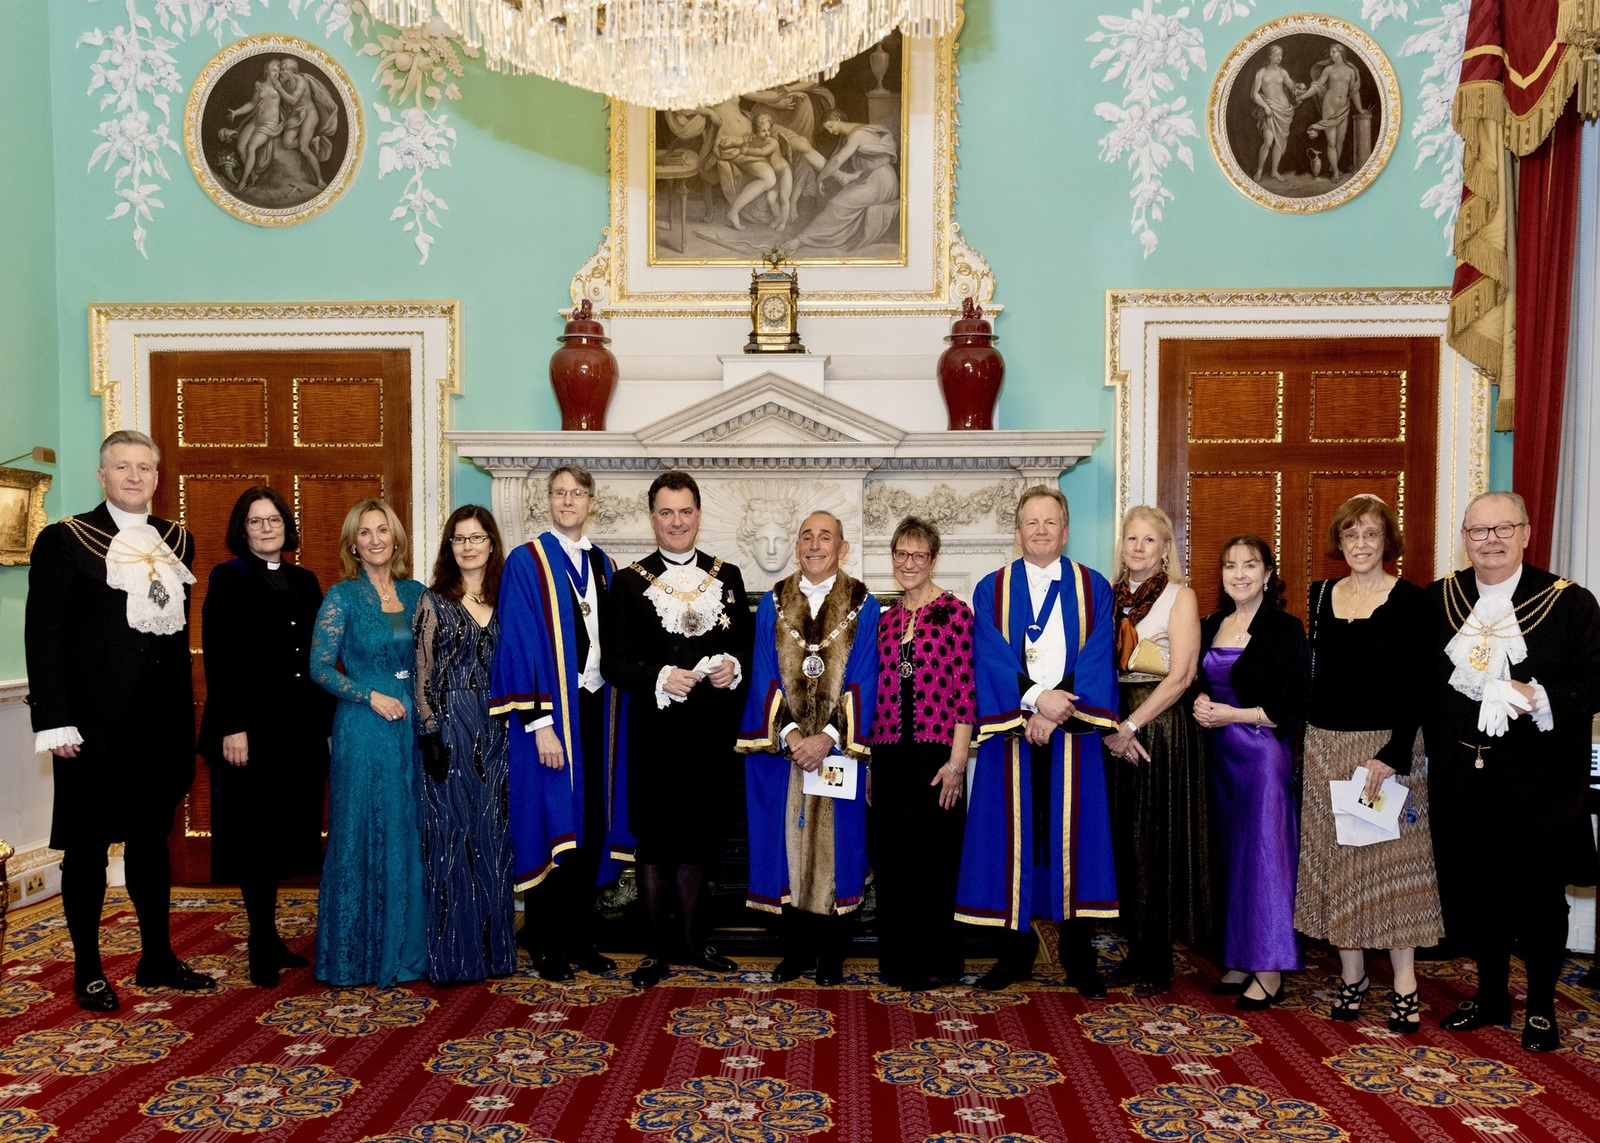 26 Oct 22 - World Trader’s Banquet with Lord Mayor Vincent Keaveney.